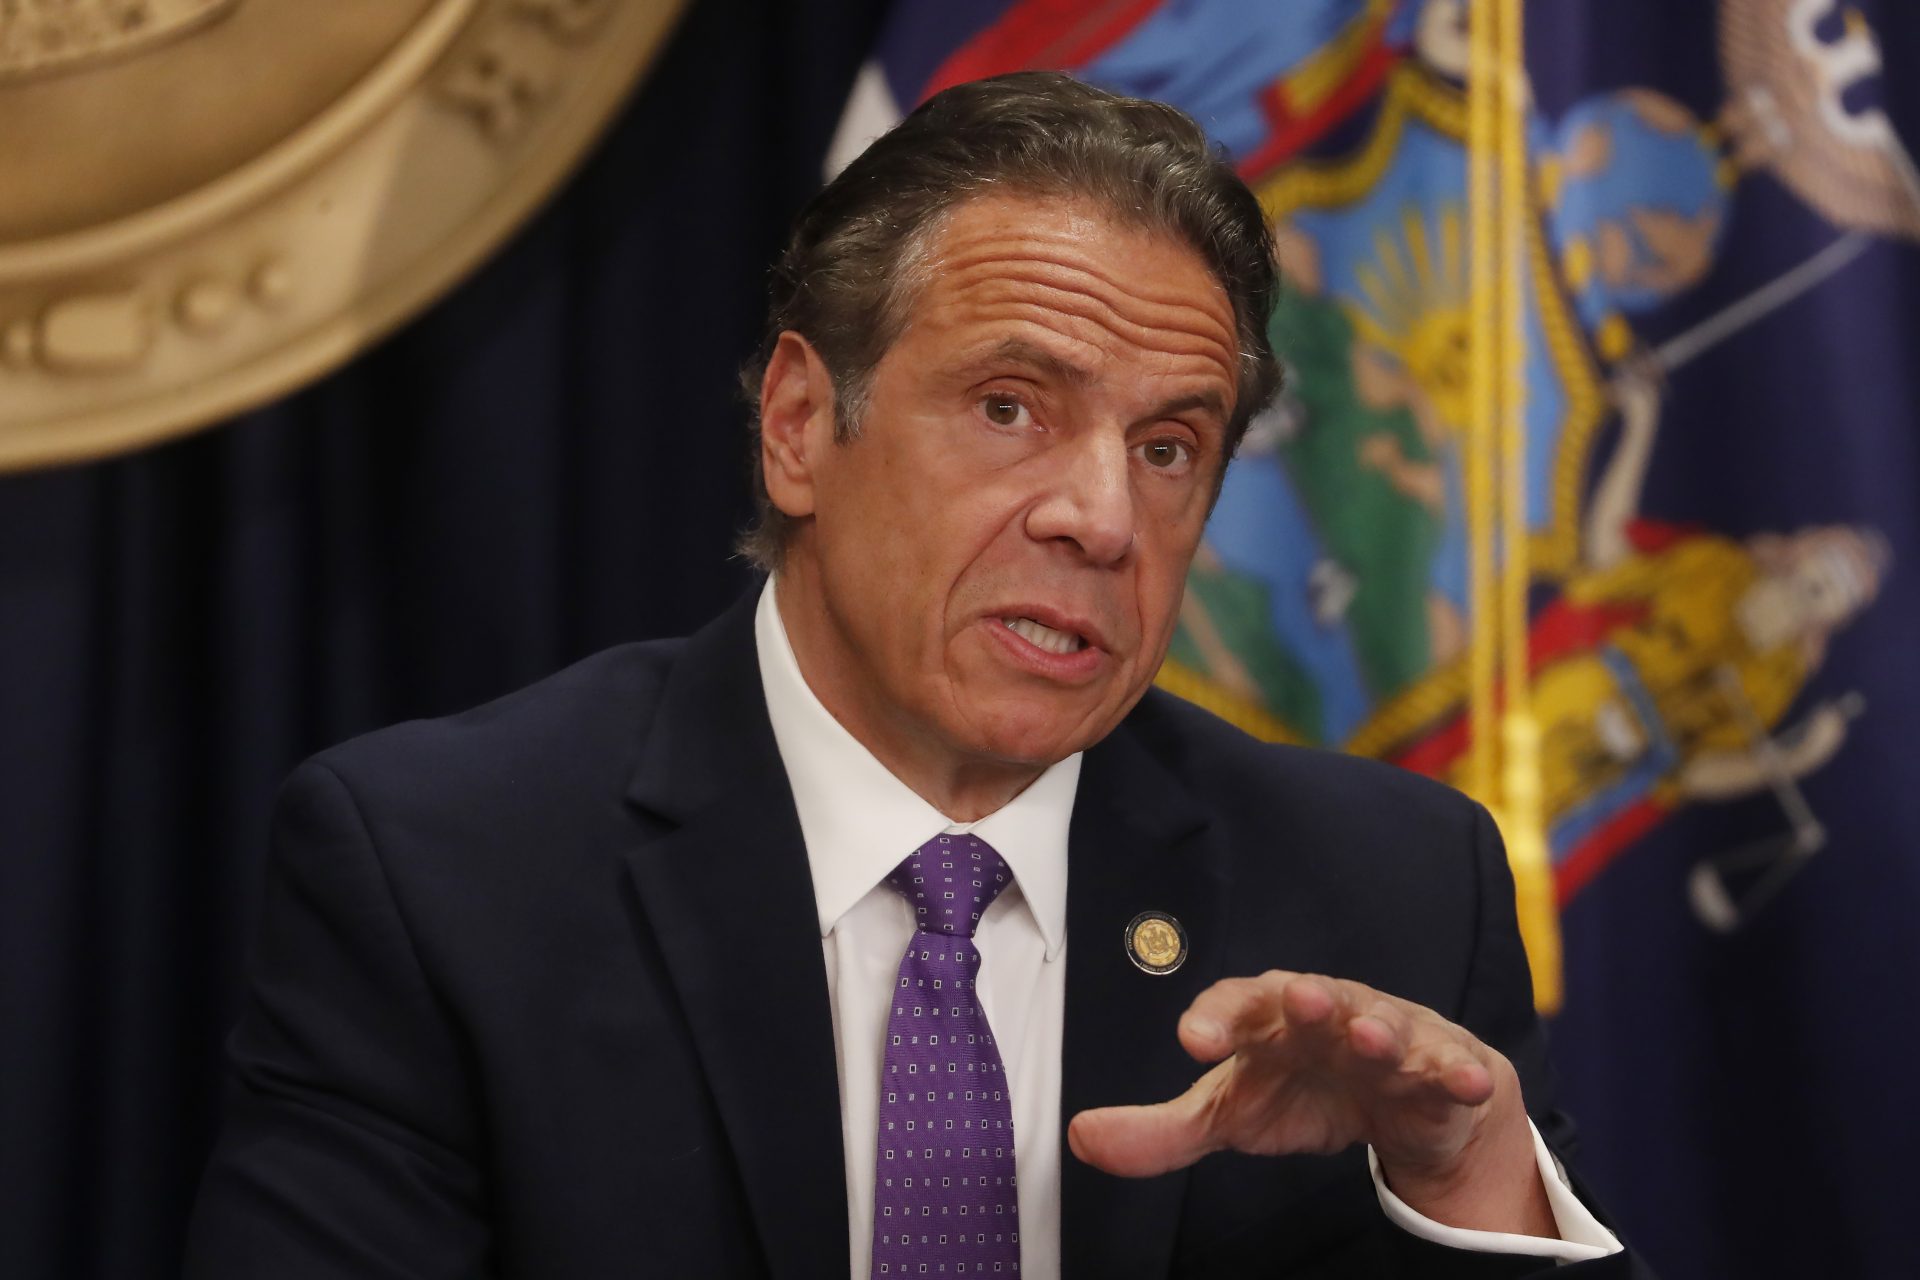 Former New York Gov. Andrew Cuomo files suit against Attorney General Letitia James stemming from past sexual misconduct allegations that led to his resignation